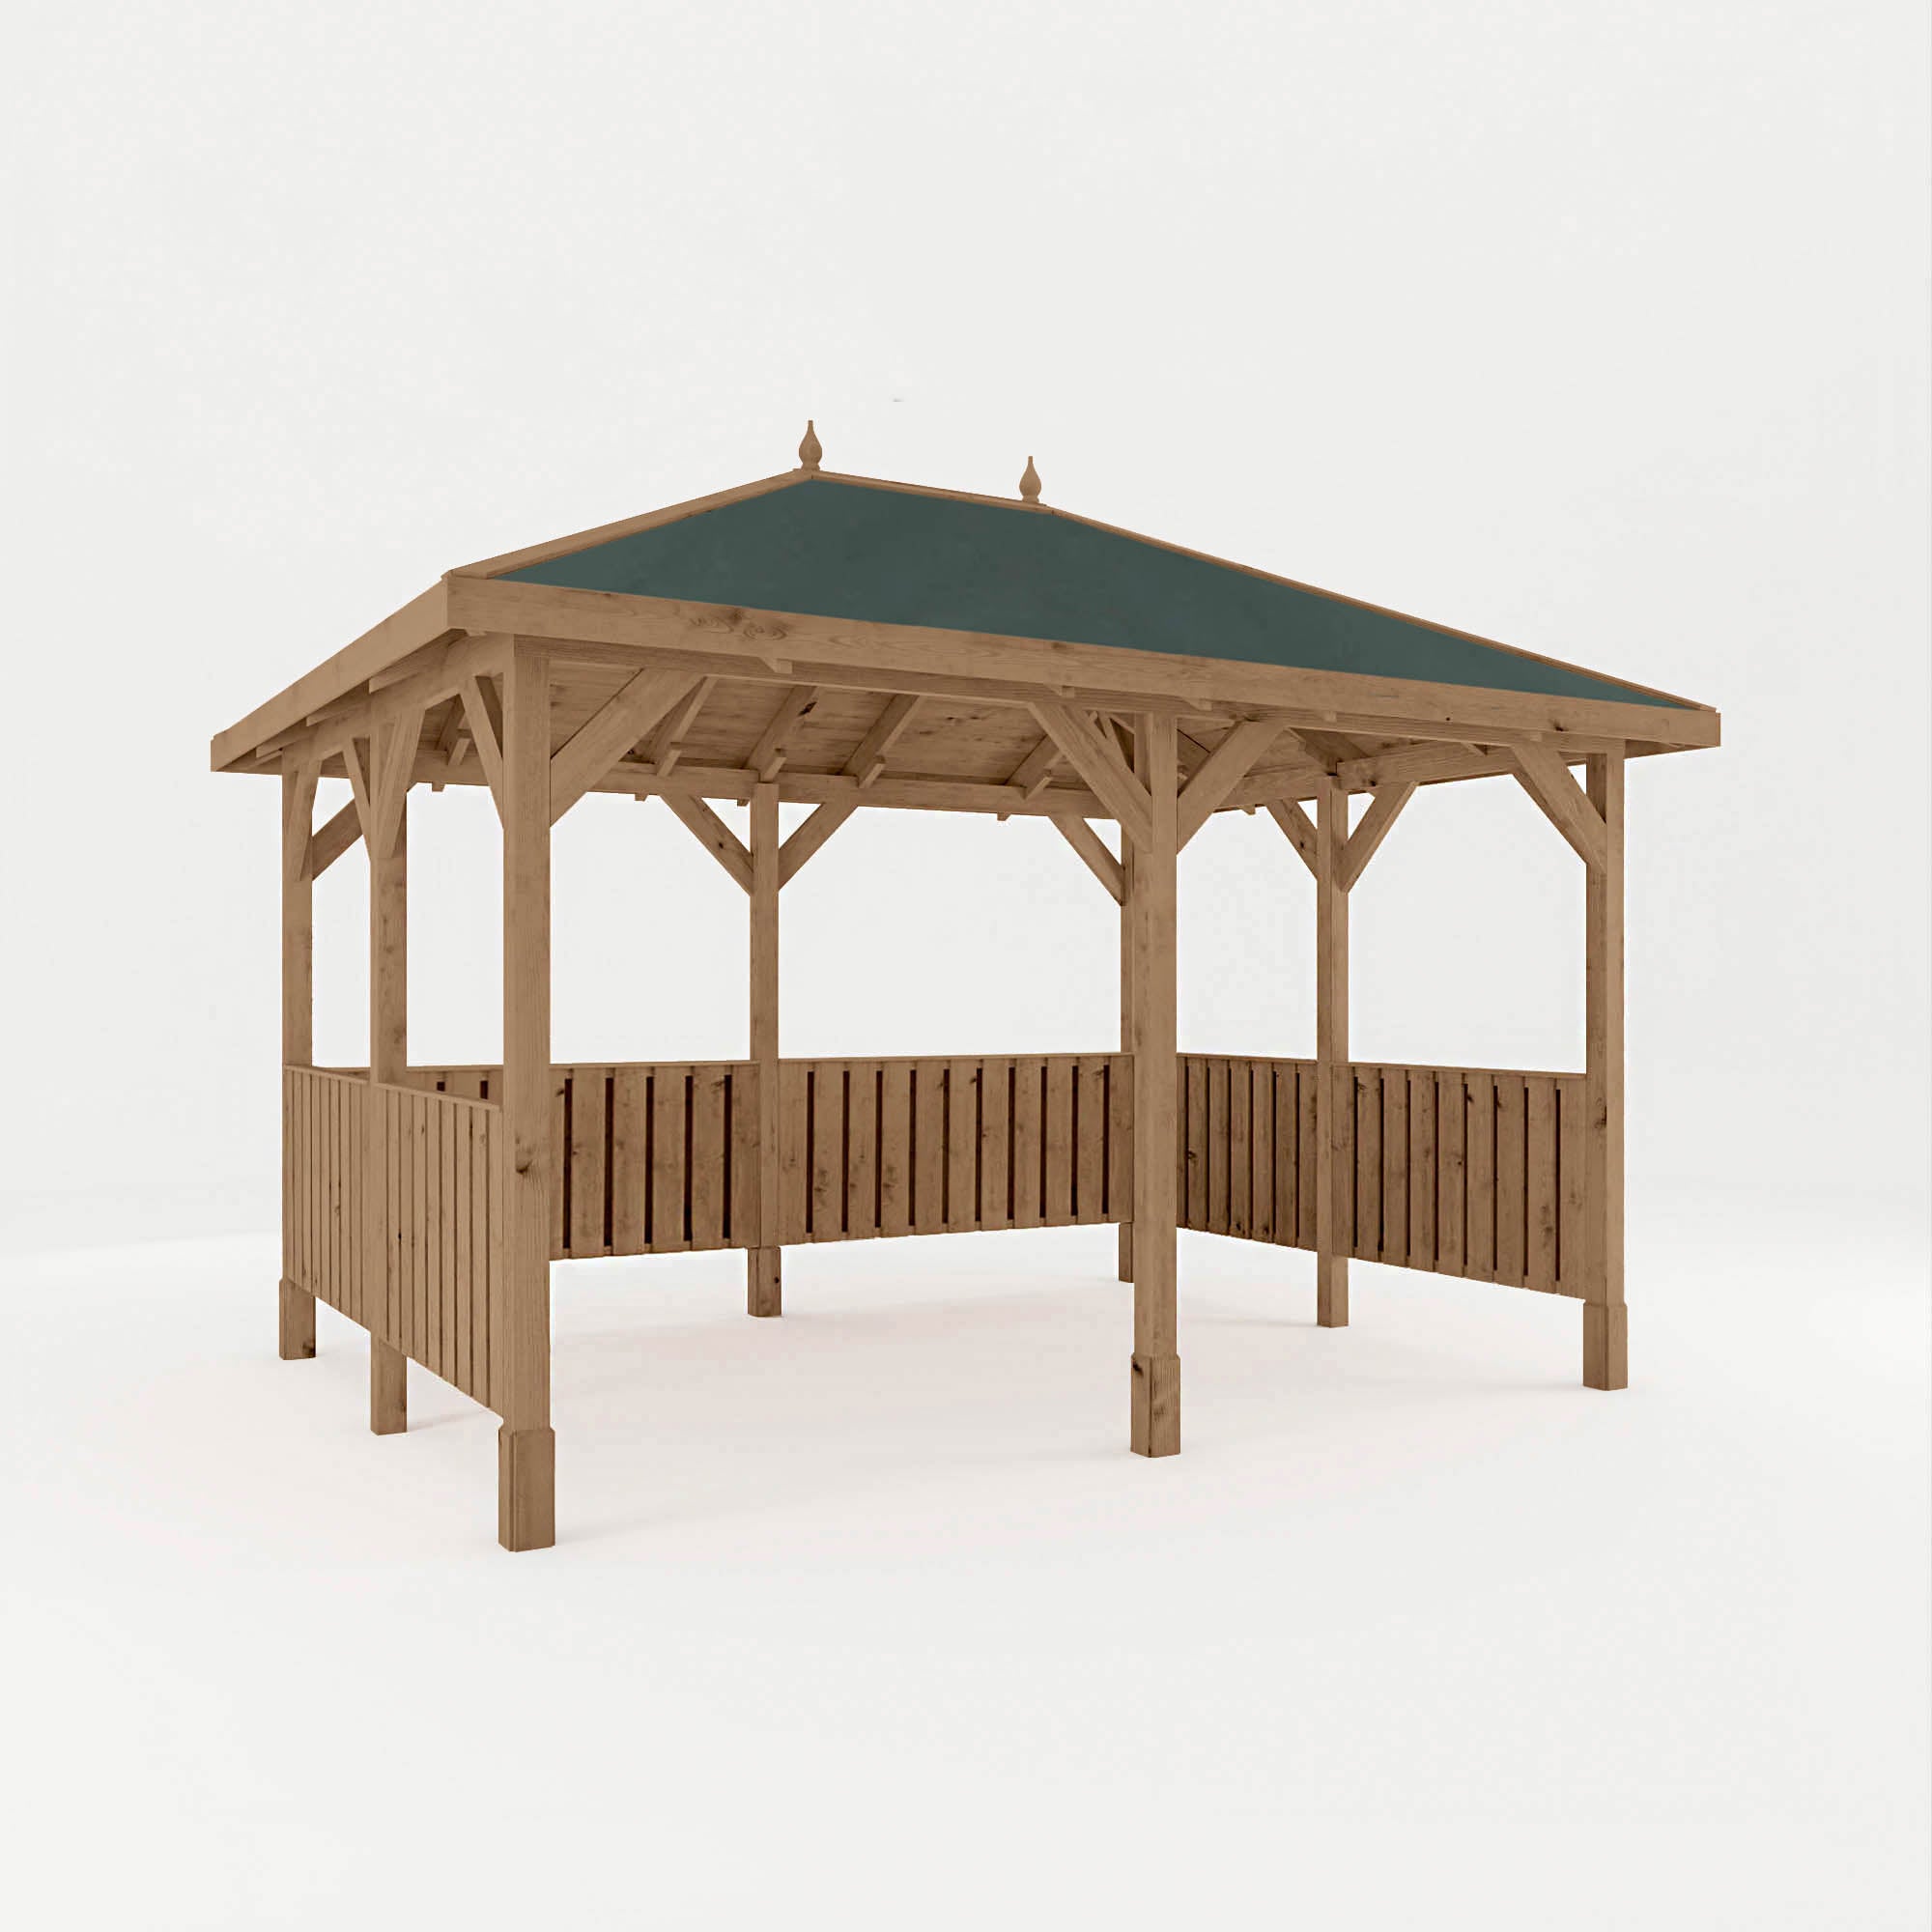 3m x 4m Pressure Treated Gazebo with Roof and Vertical Rails